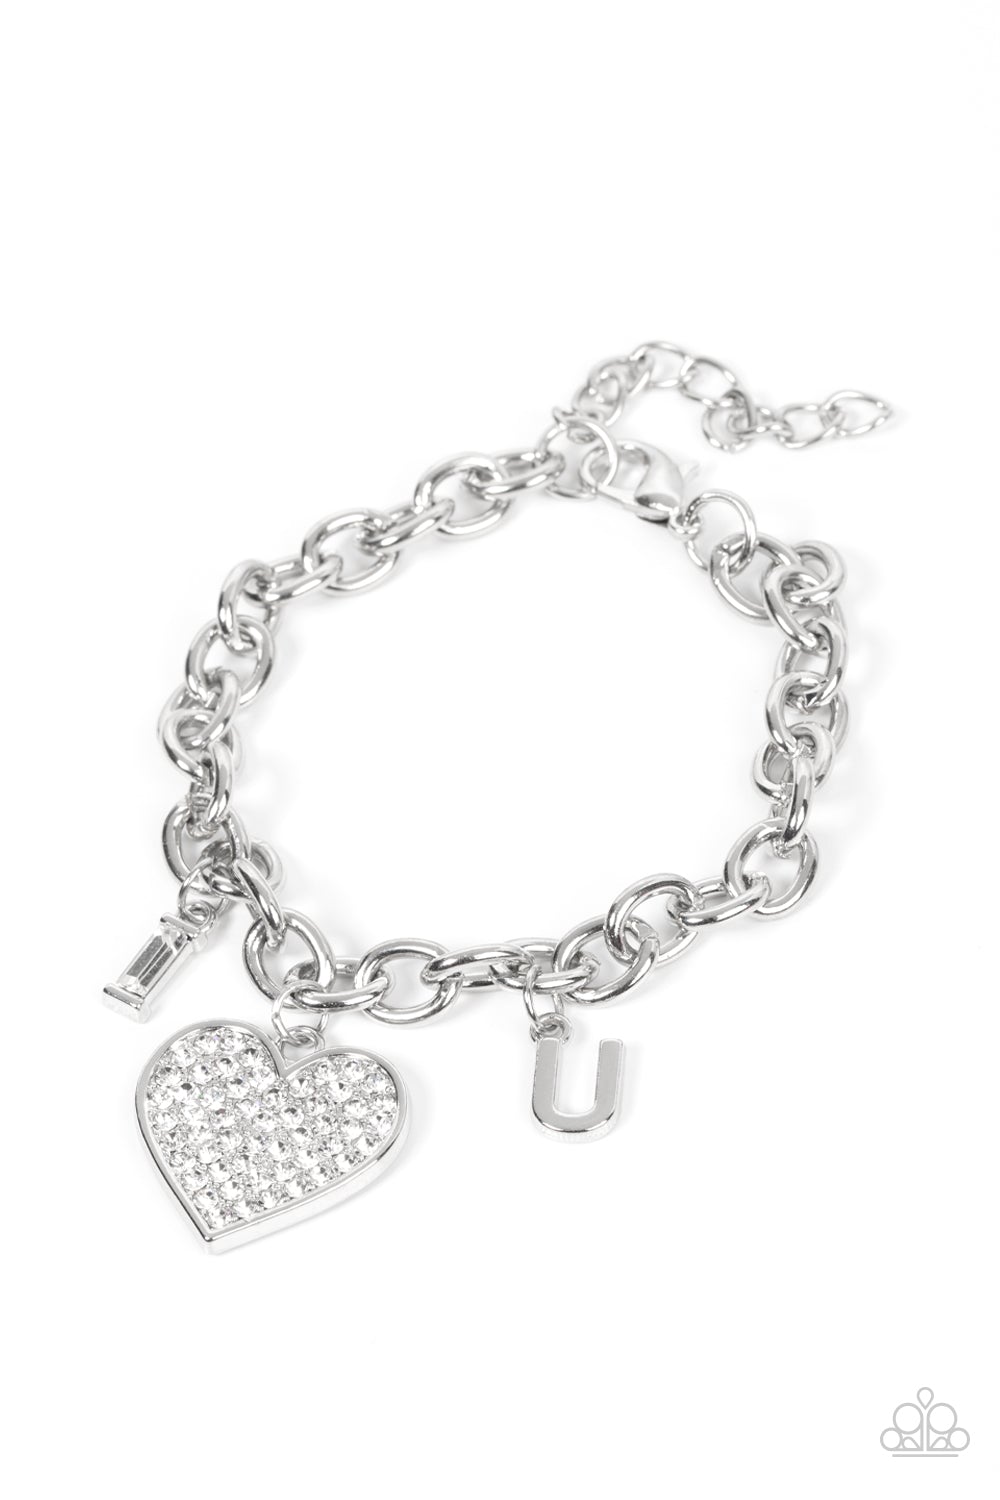 Letters of Love White Necklace & Bracelet Set - Paparazzi Accessories Encrusted with sparkly white rhinestones, an oversized silver heart charm dances between a pair of "I" and "U" charms, resulting in a heartwarming message along a dainty silver chain across the chest and around the wrist. Sold as one individual necklace. Includes one matching bracelet. Get The Complete Look! Bracelet: "Declaration of Love - White"